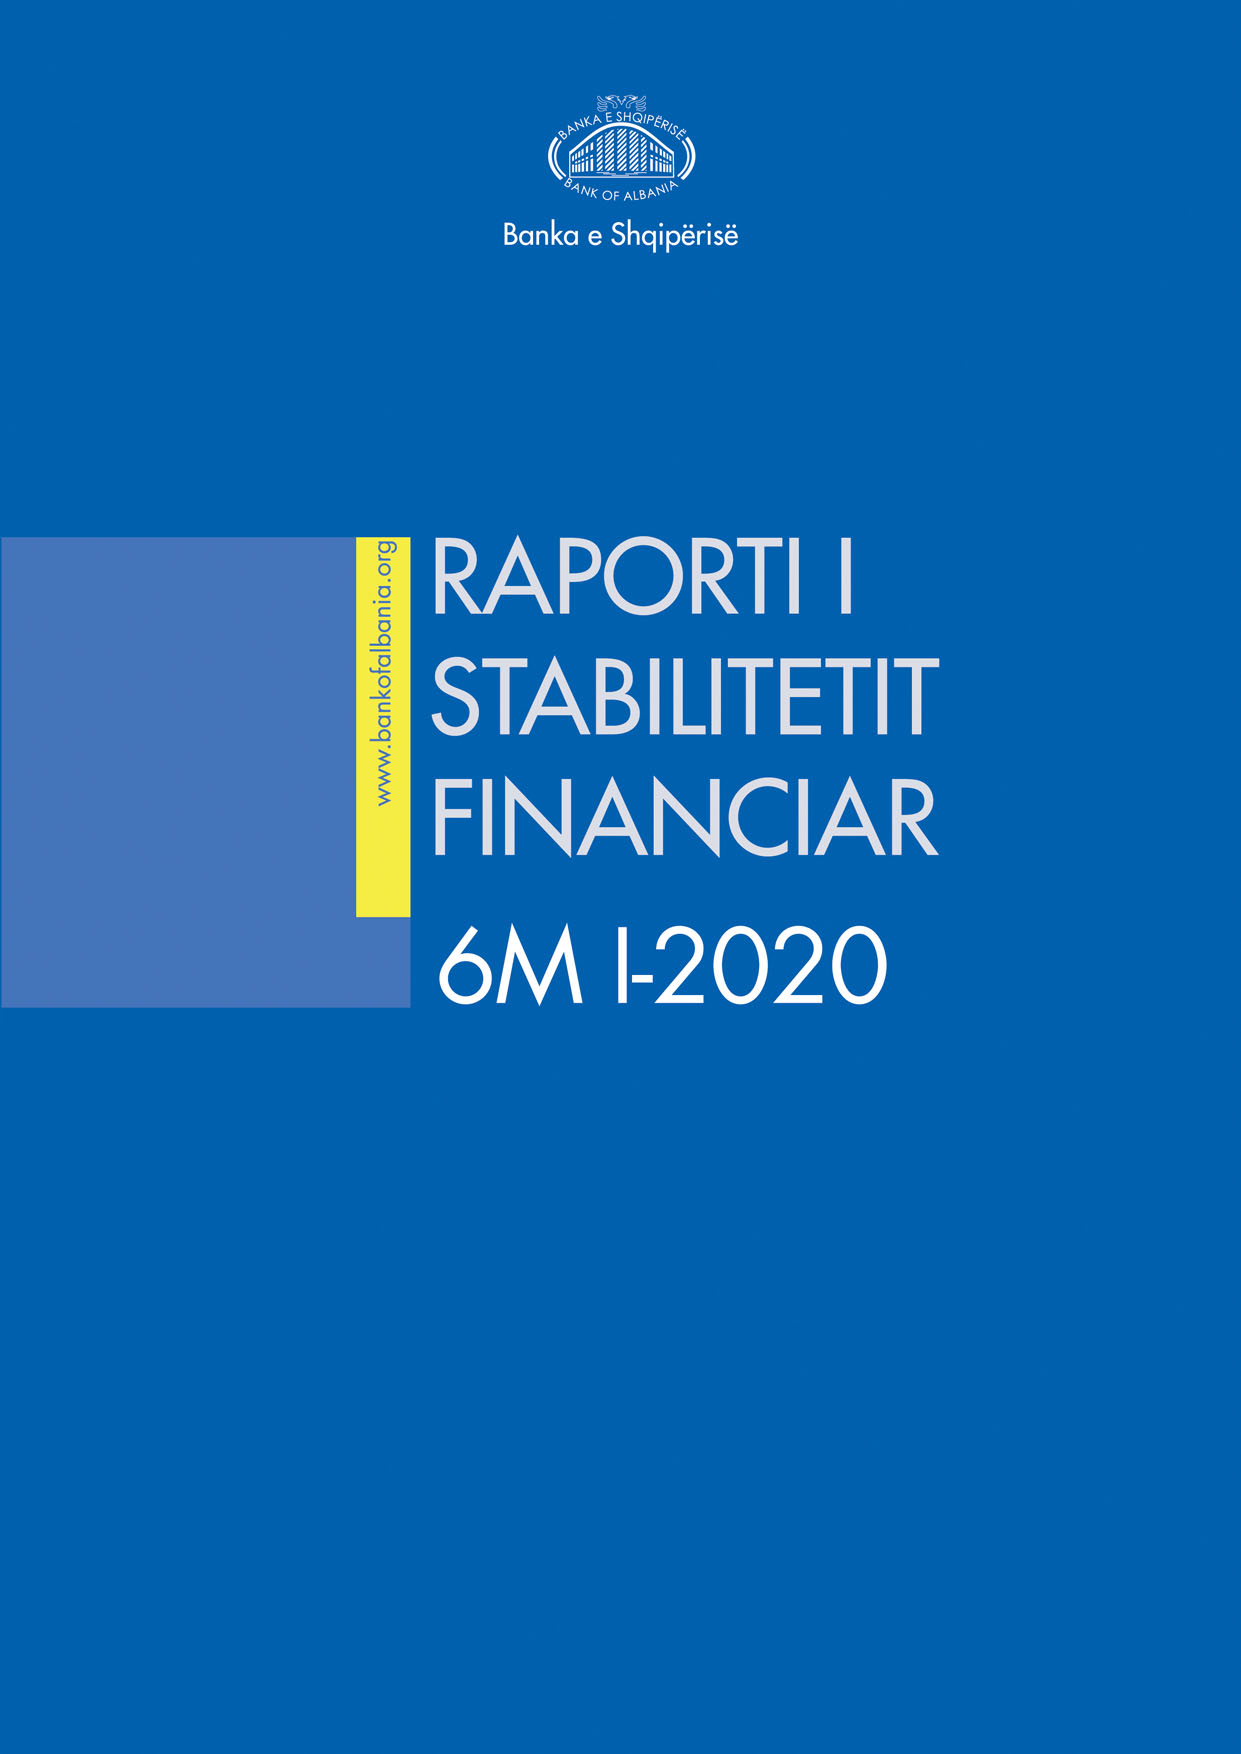 Financial Stability Report - 2020 H1